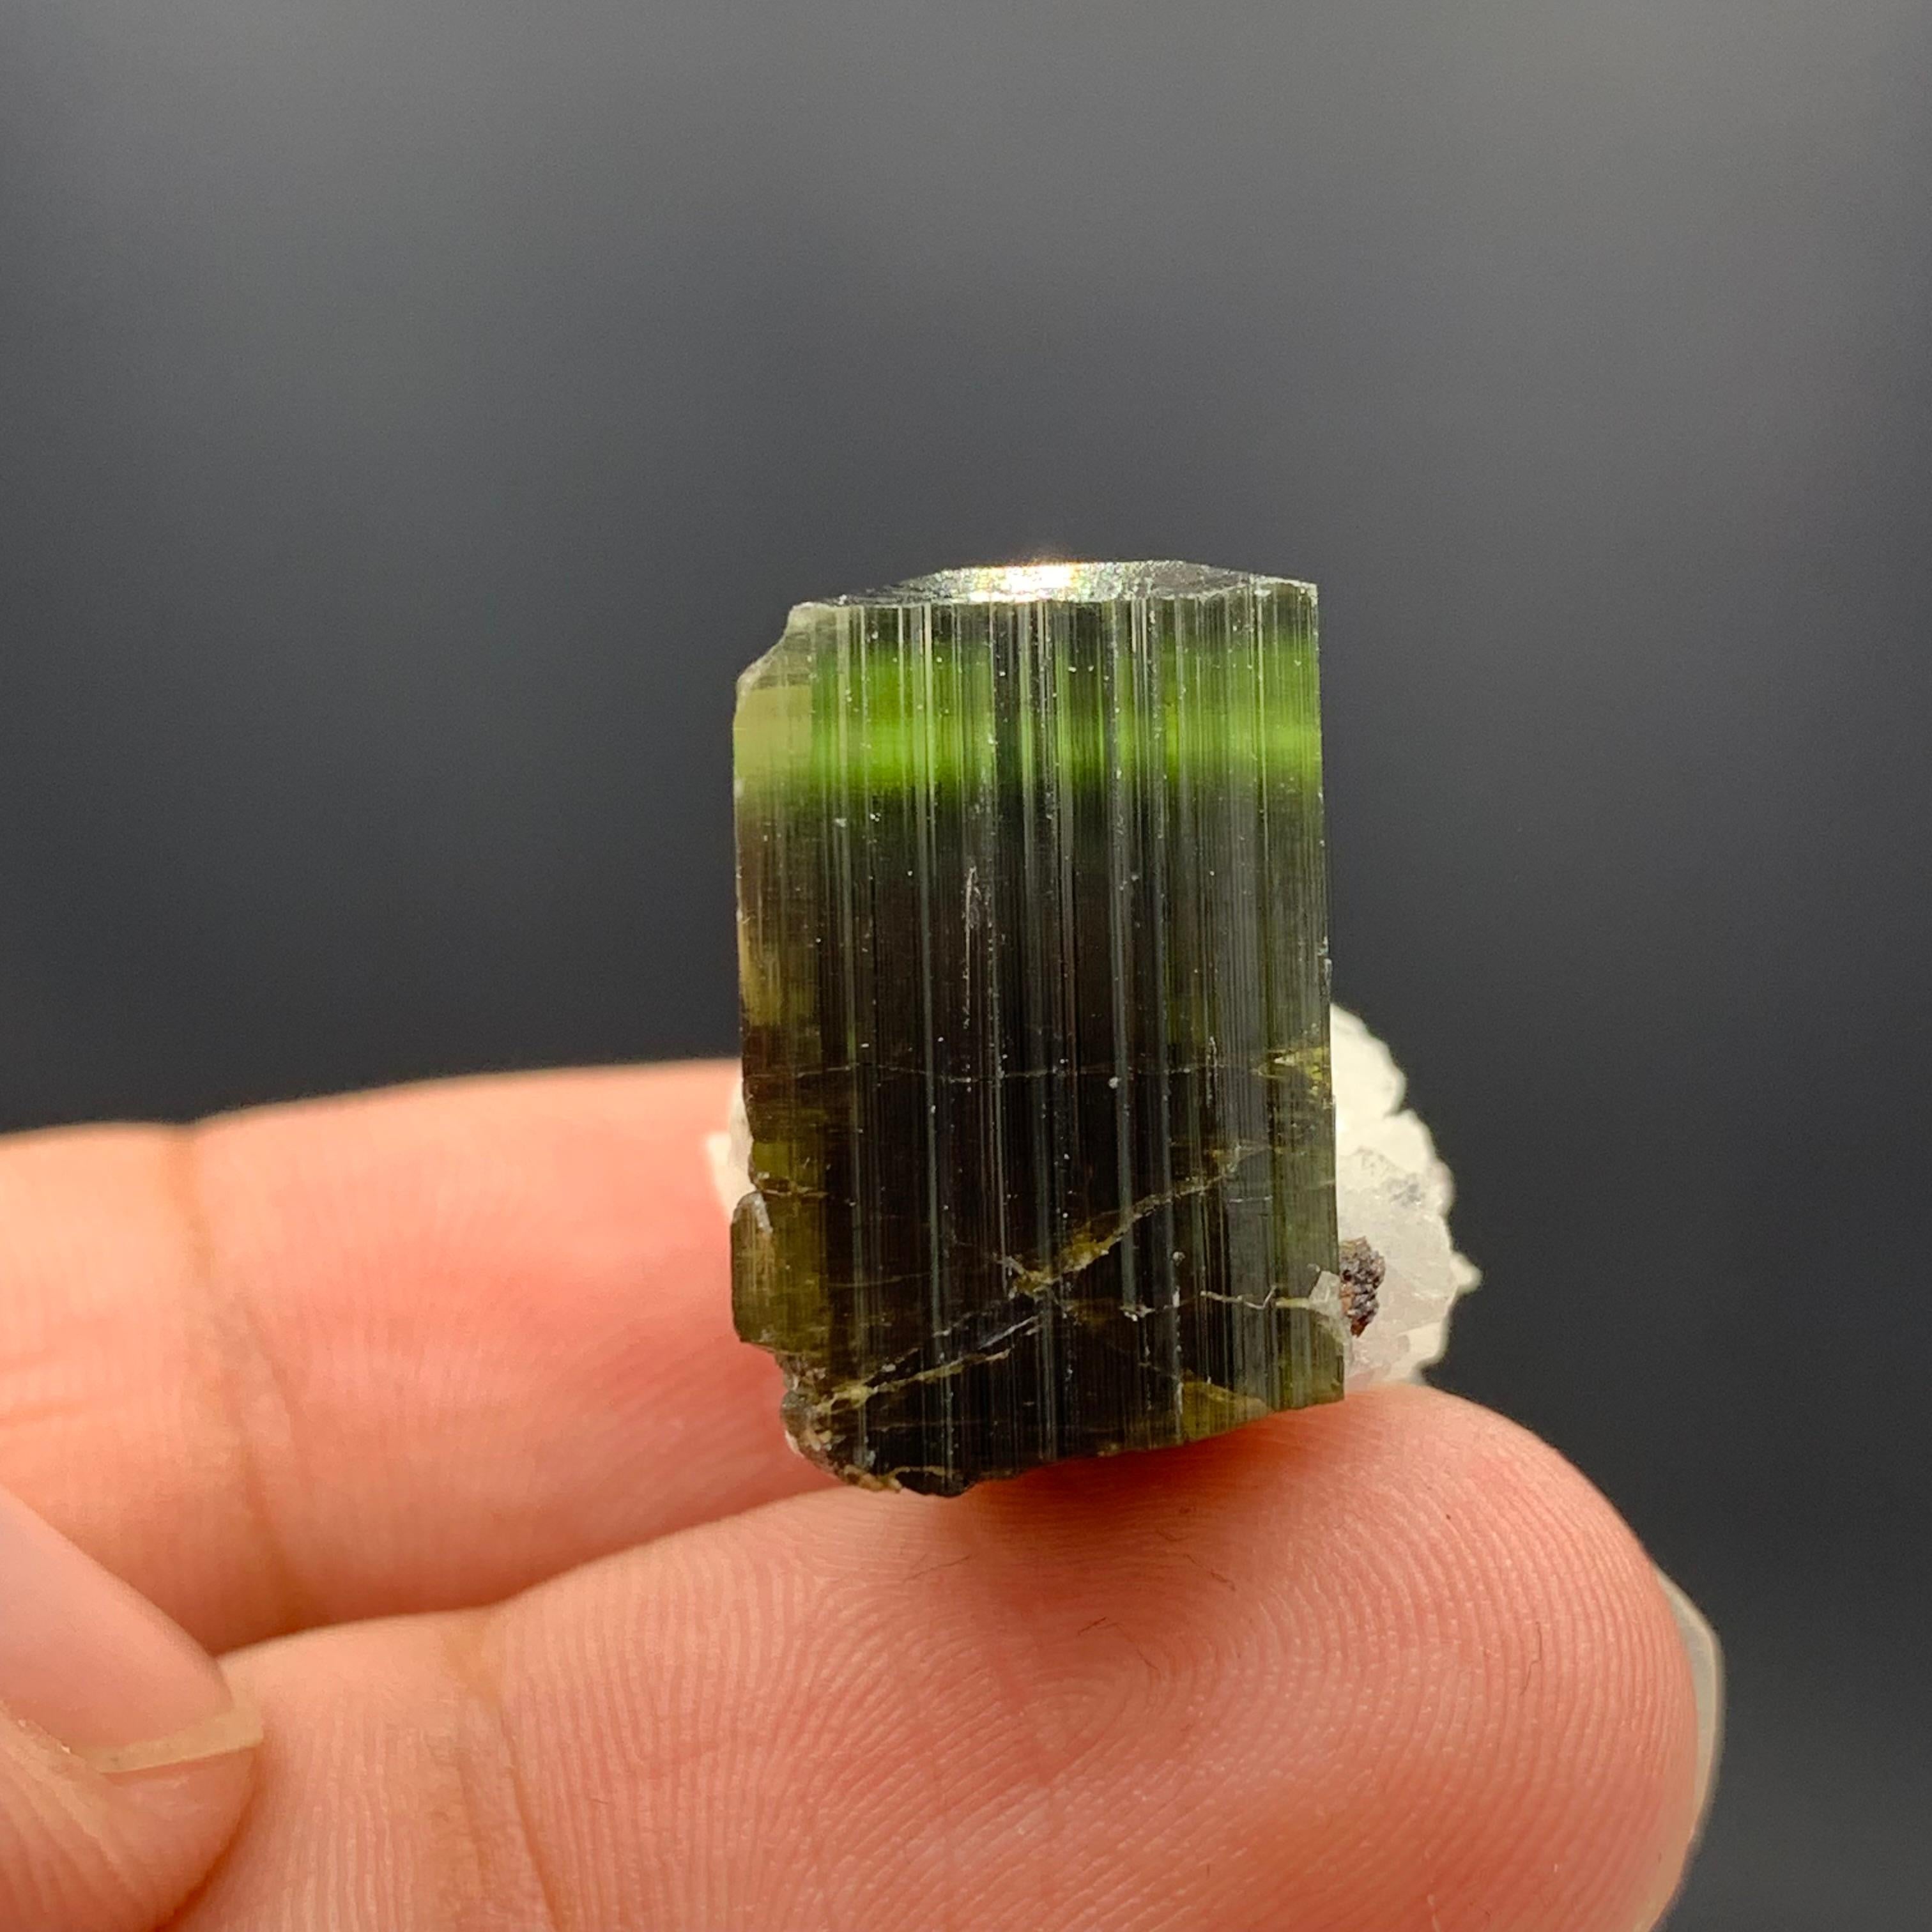 18th Century and Earlier 38.55 Carat Adorable Tourmaline Specimen With Albite From Skardu, Pakistan  For Sale